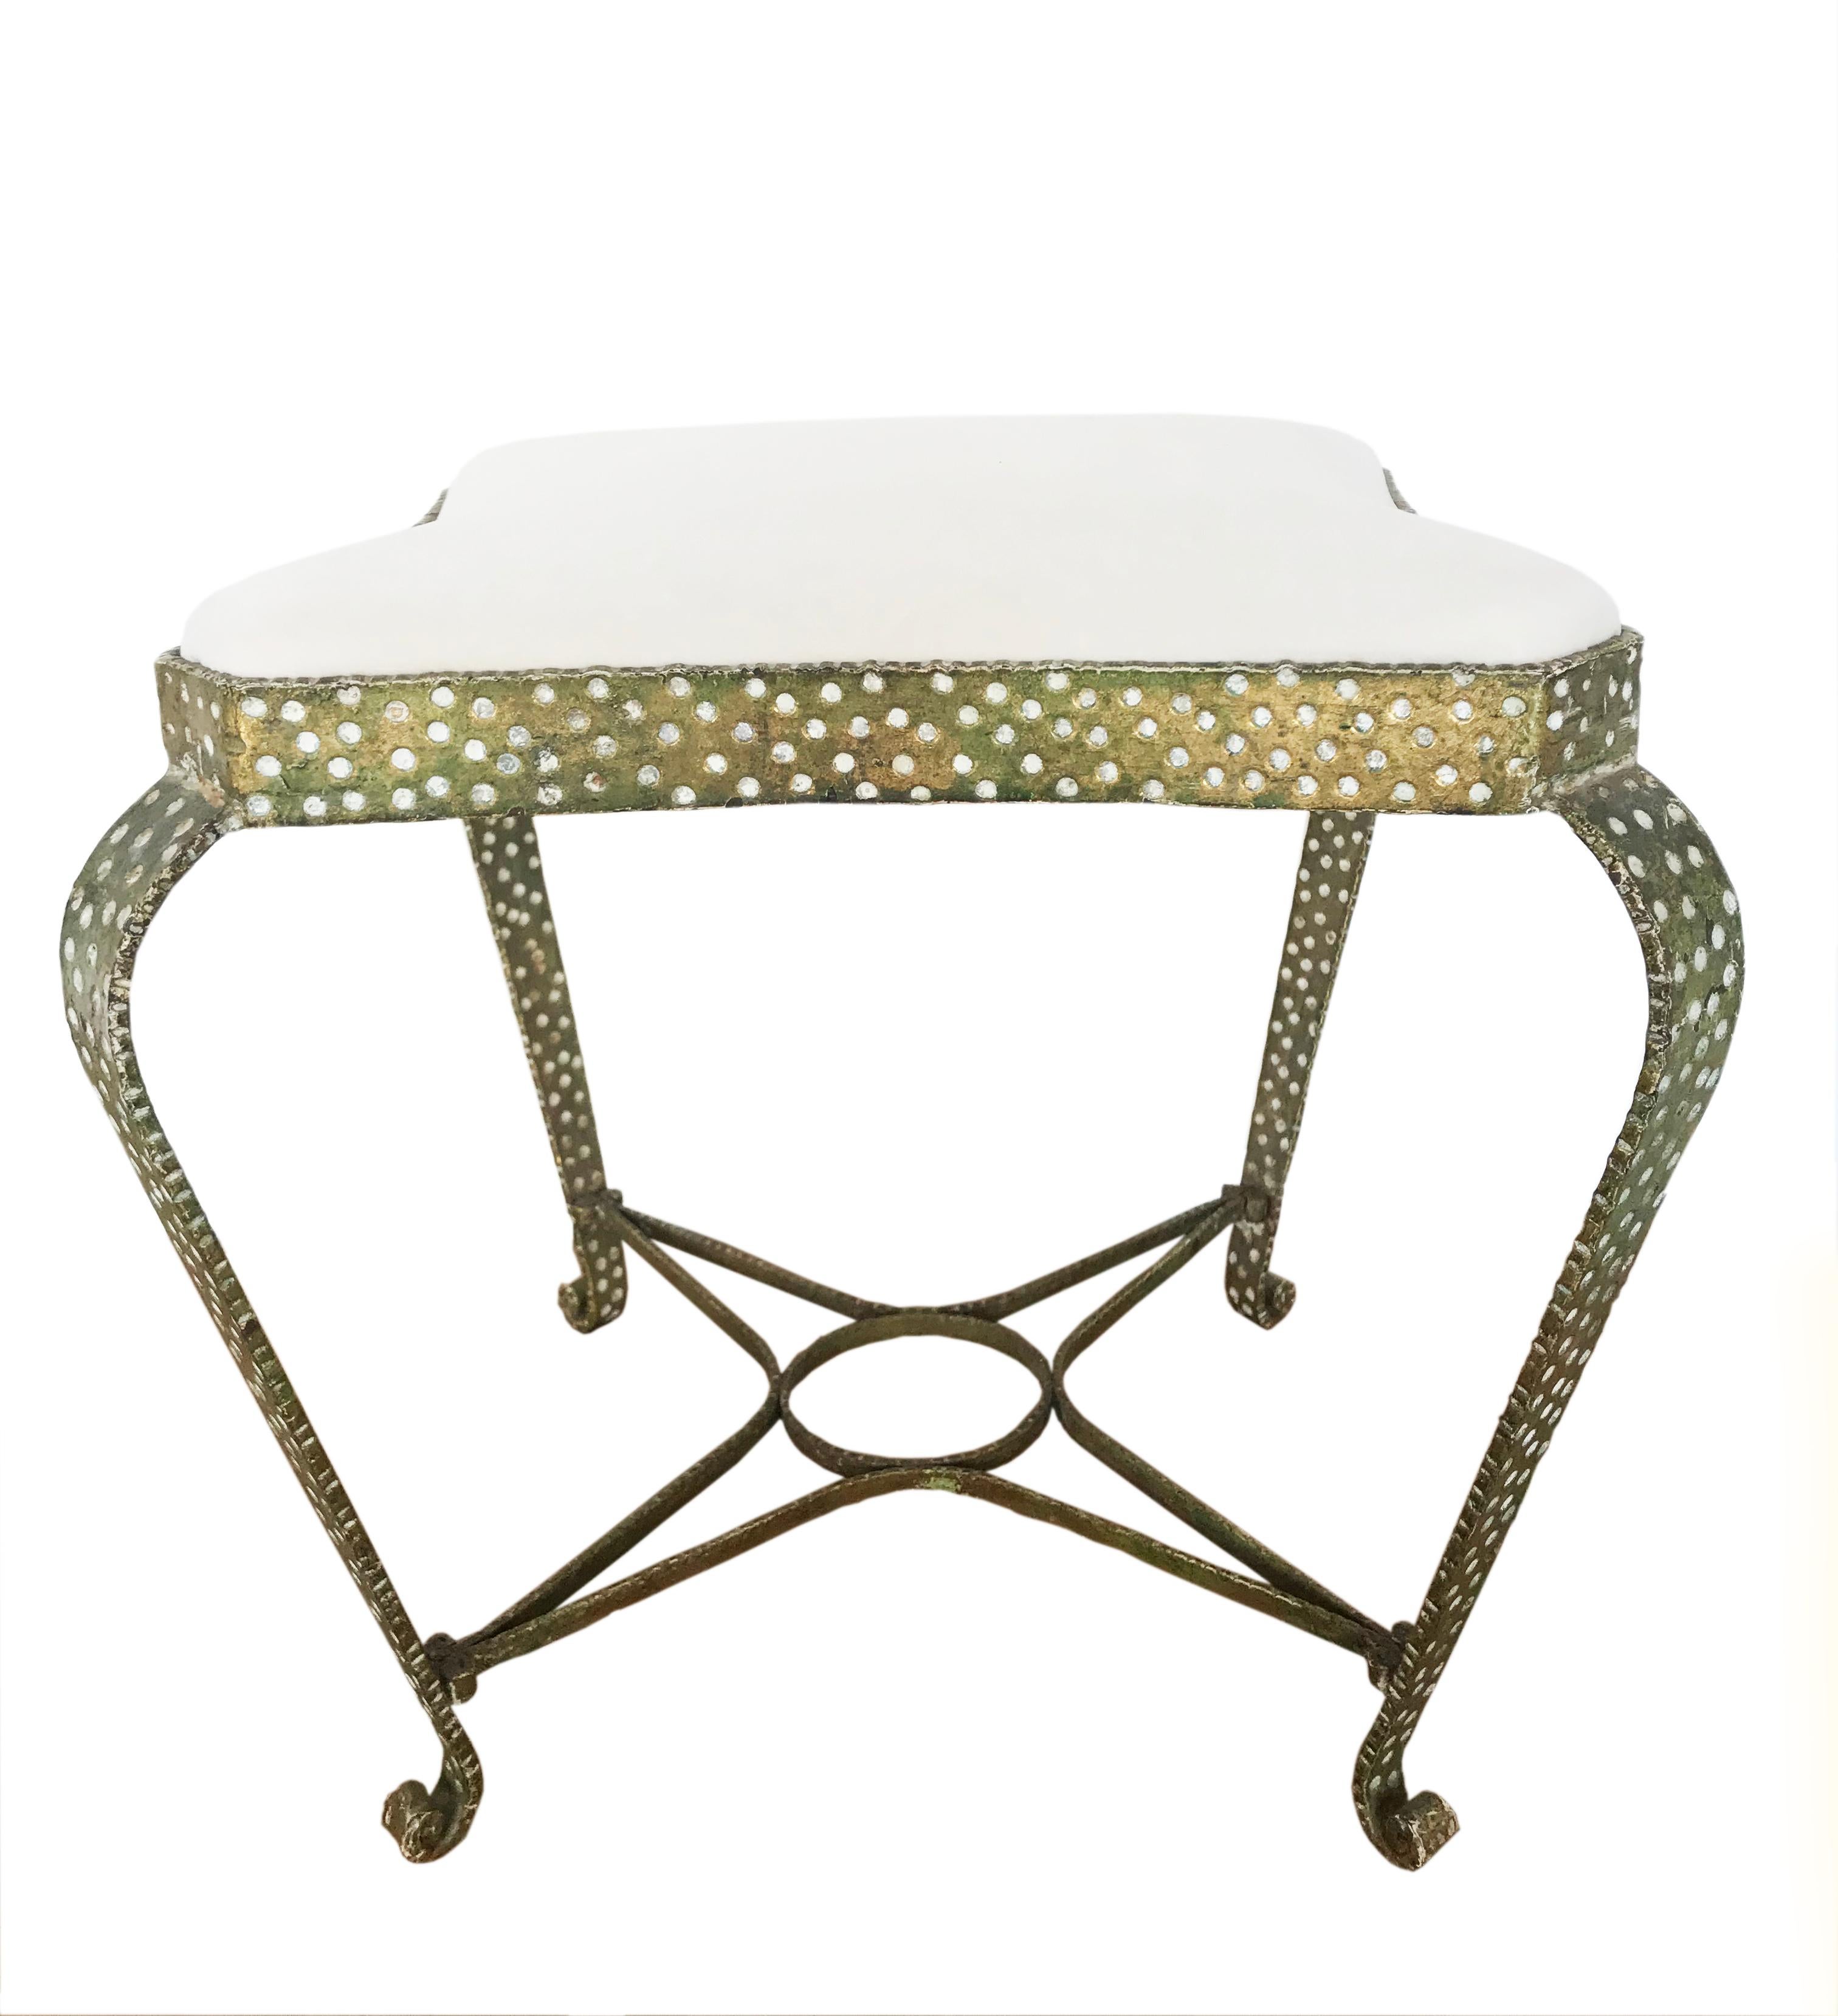 Highly desirable wrought metal footstools with gold overlay, hammered dotted design. Upholstered in cream velvet. Italian, circa 1950s.
Designed by Pier Luigi Colli.

Pier Luigi Colli (1895-1968) studied at the Paris École des Arts Décoratifs and